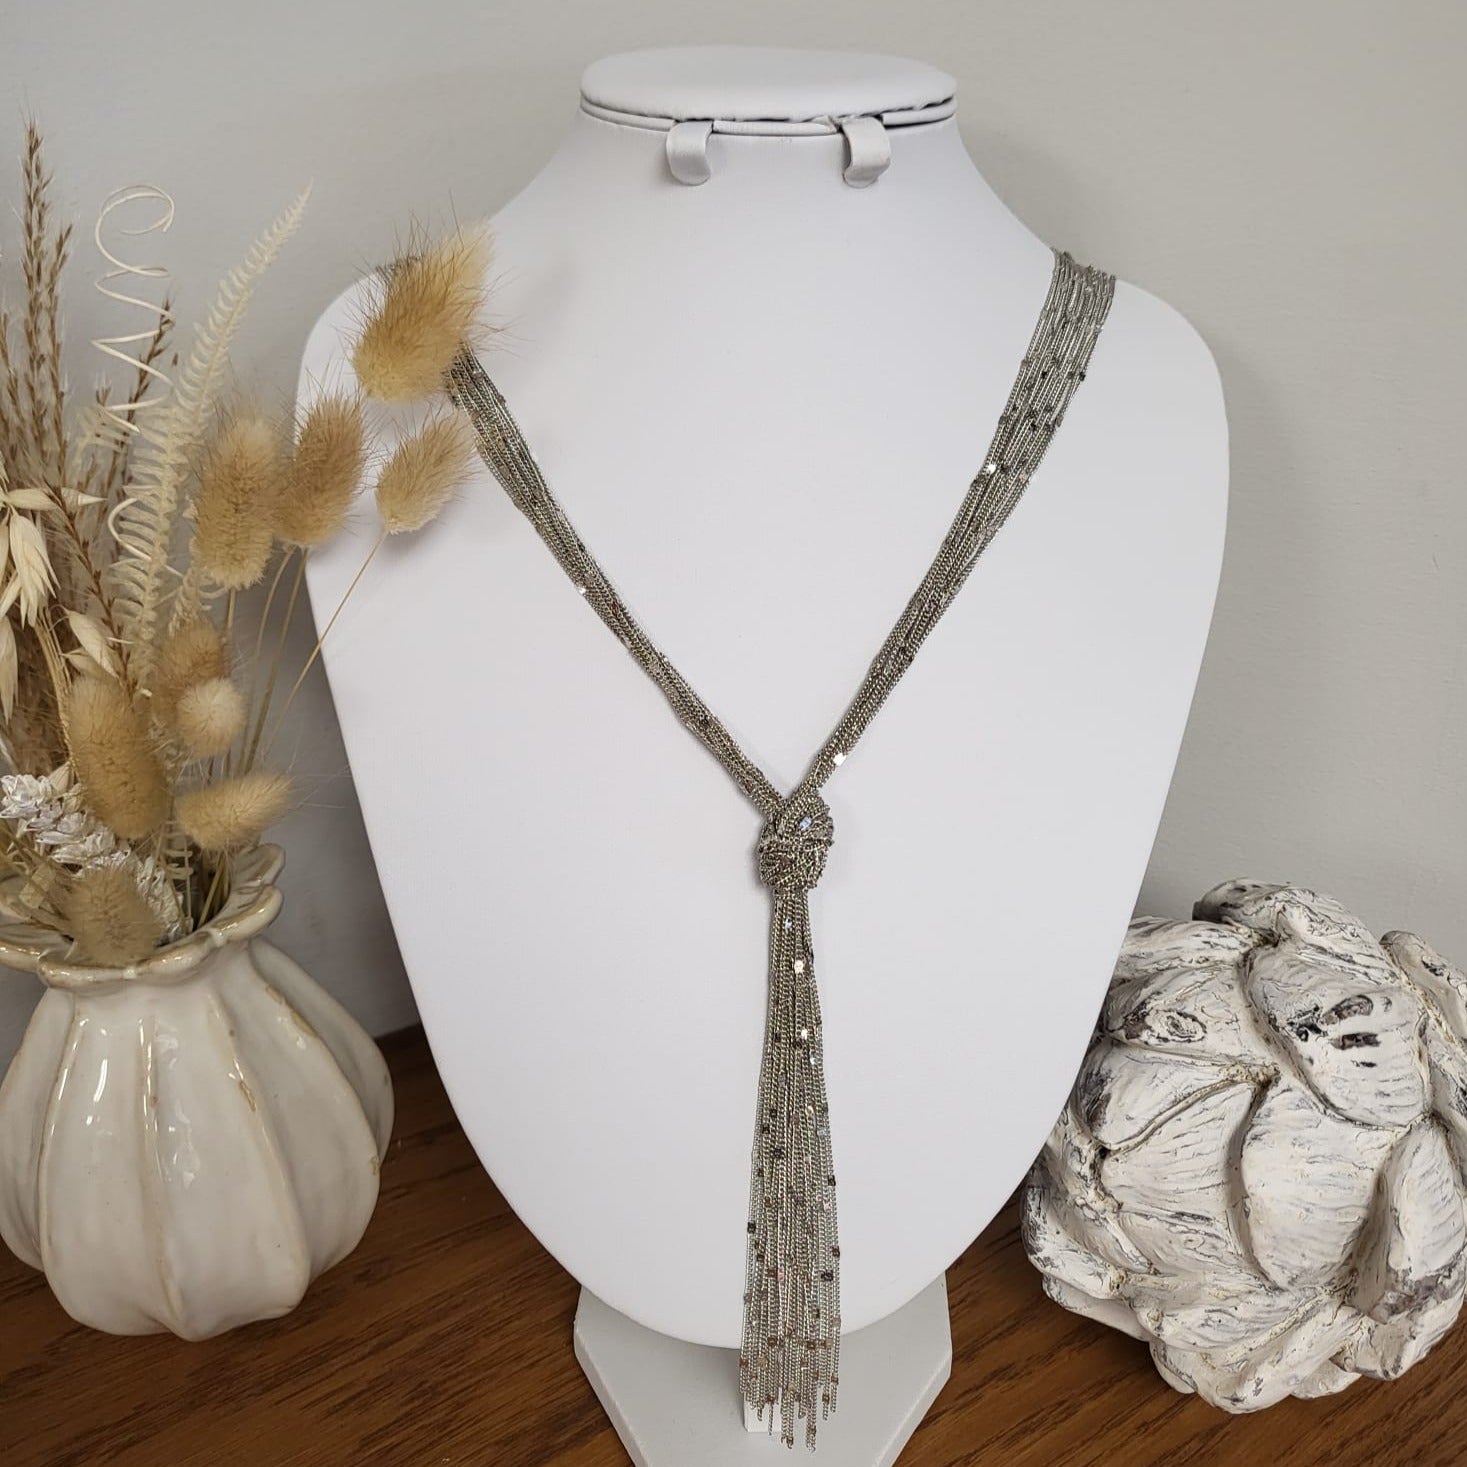 Long chain knotted necklace